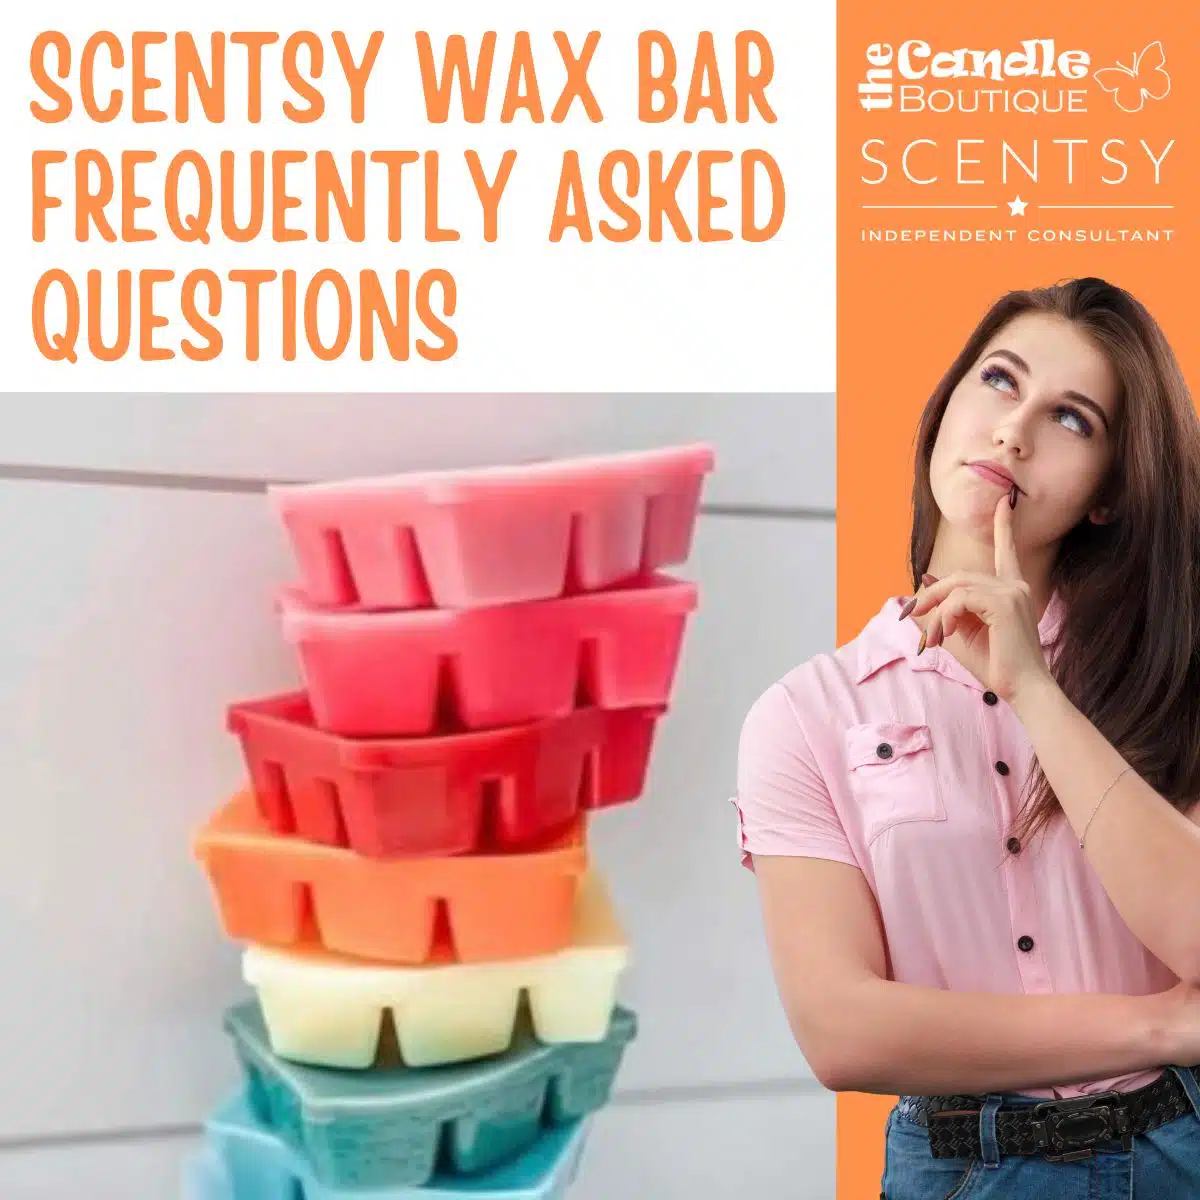 Scentsy Wax Bar Frequently Asked Questions - The Candle Boutique